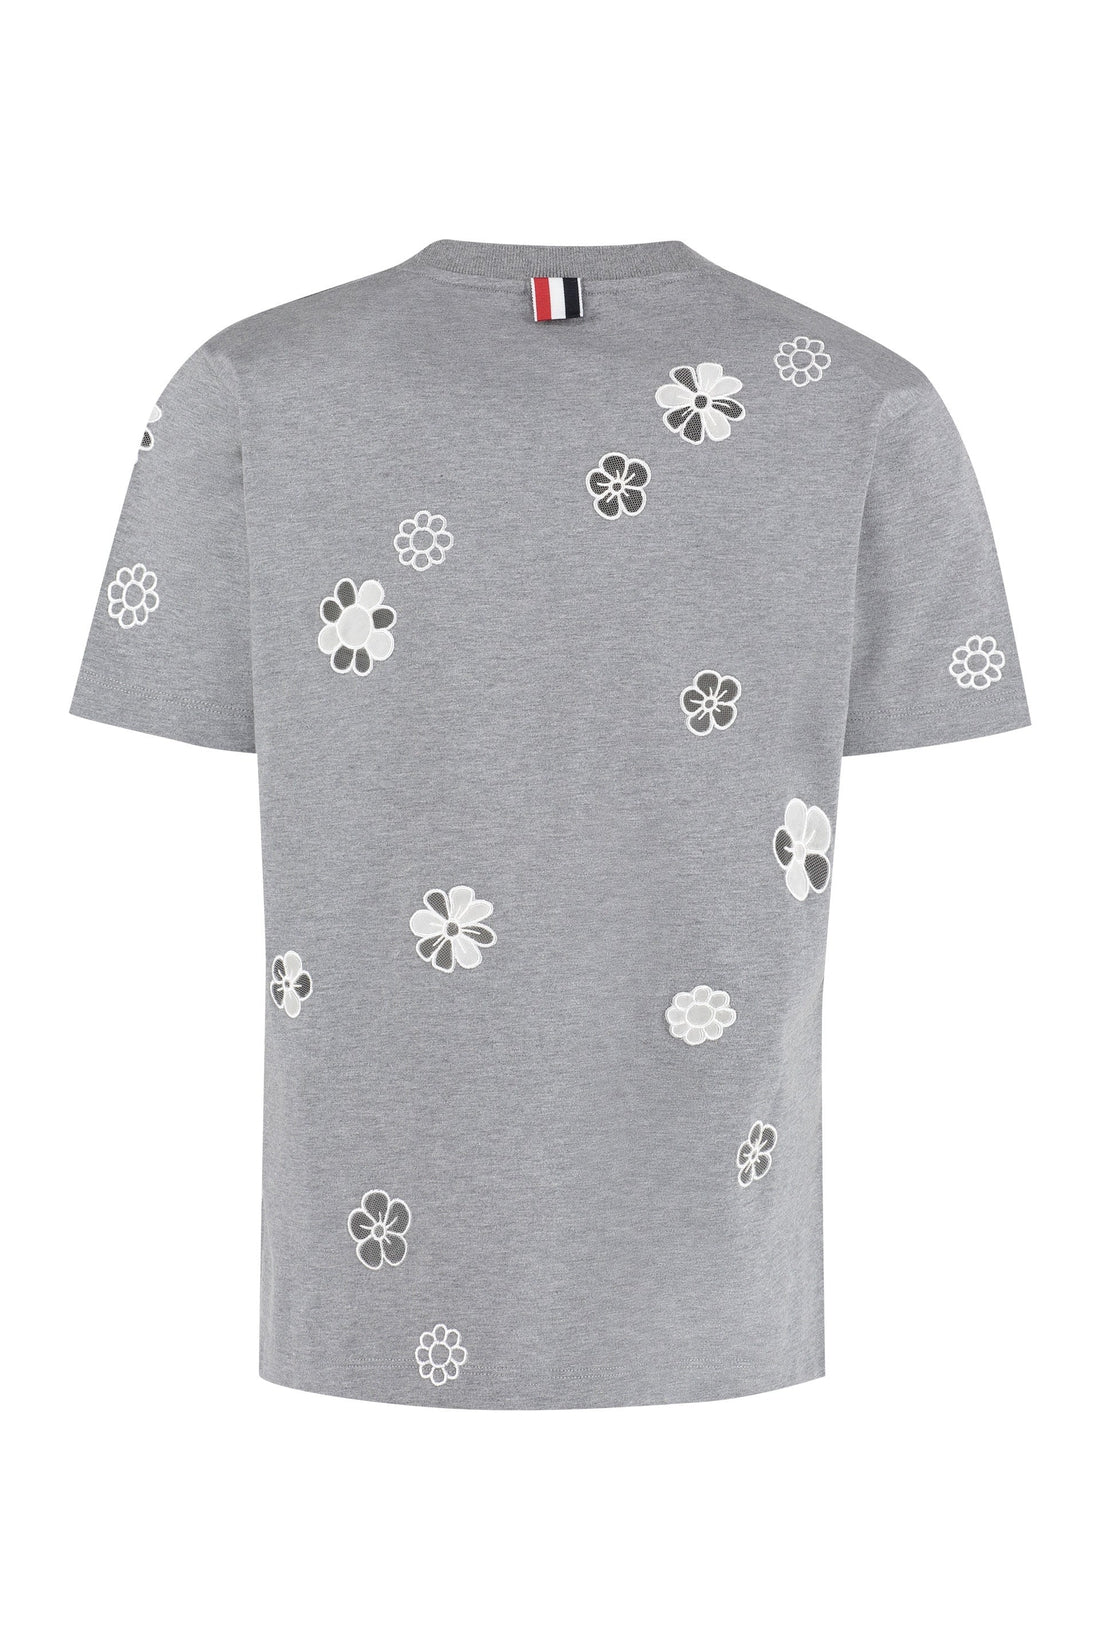 Thom Browne-OUTLET-SALE-Embroidered cotton T-shirt-ARCHIVIST